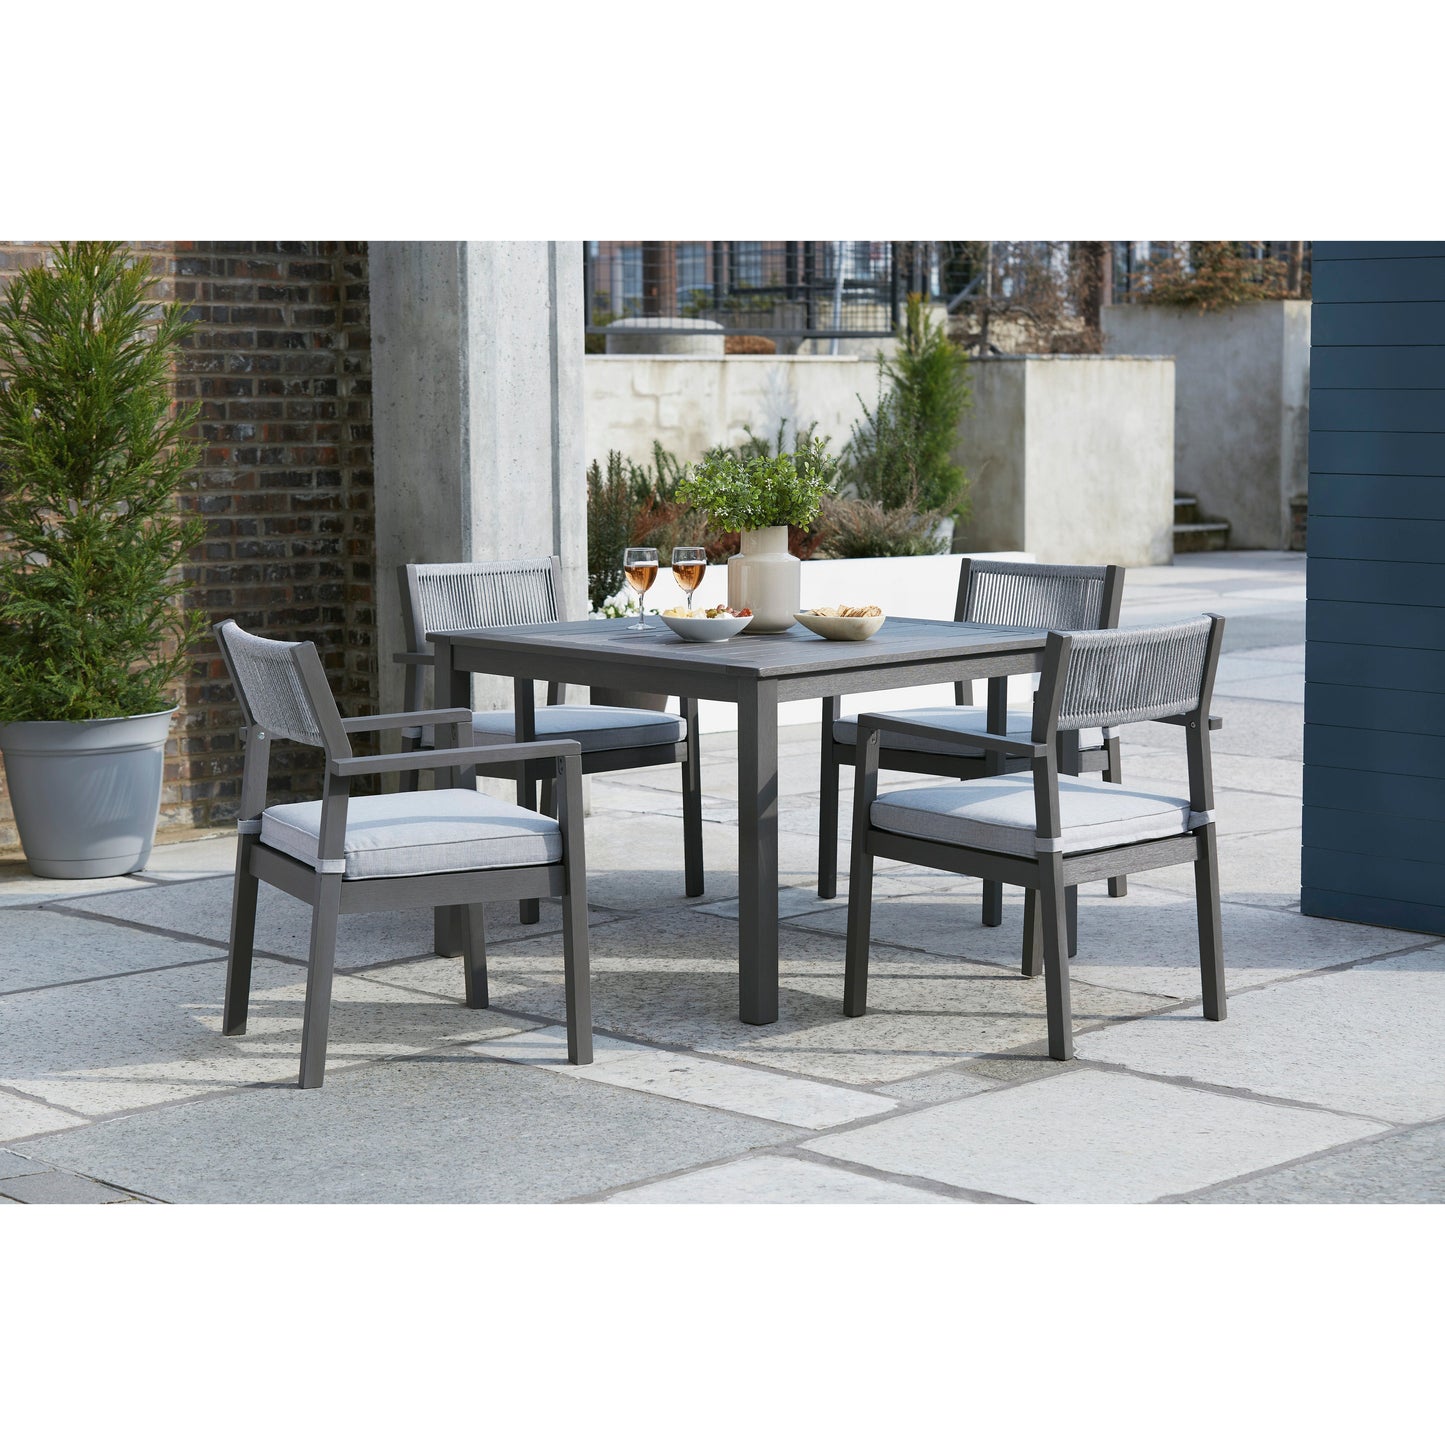 EDEN TOWN OUTDOOR DINING TABLE & 4 CHAIRS